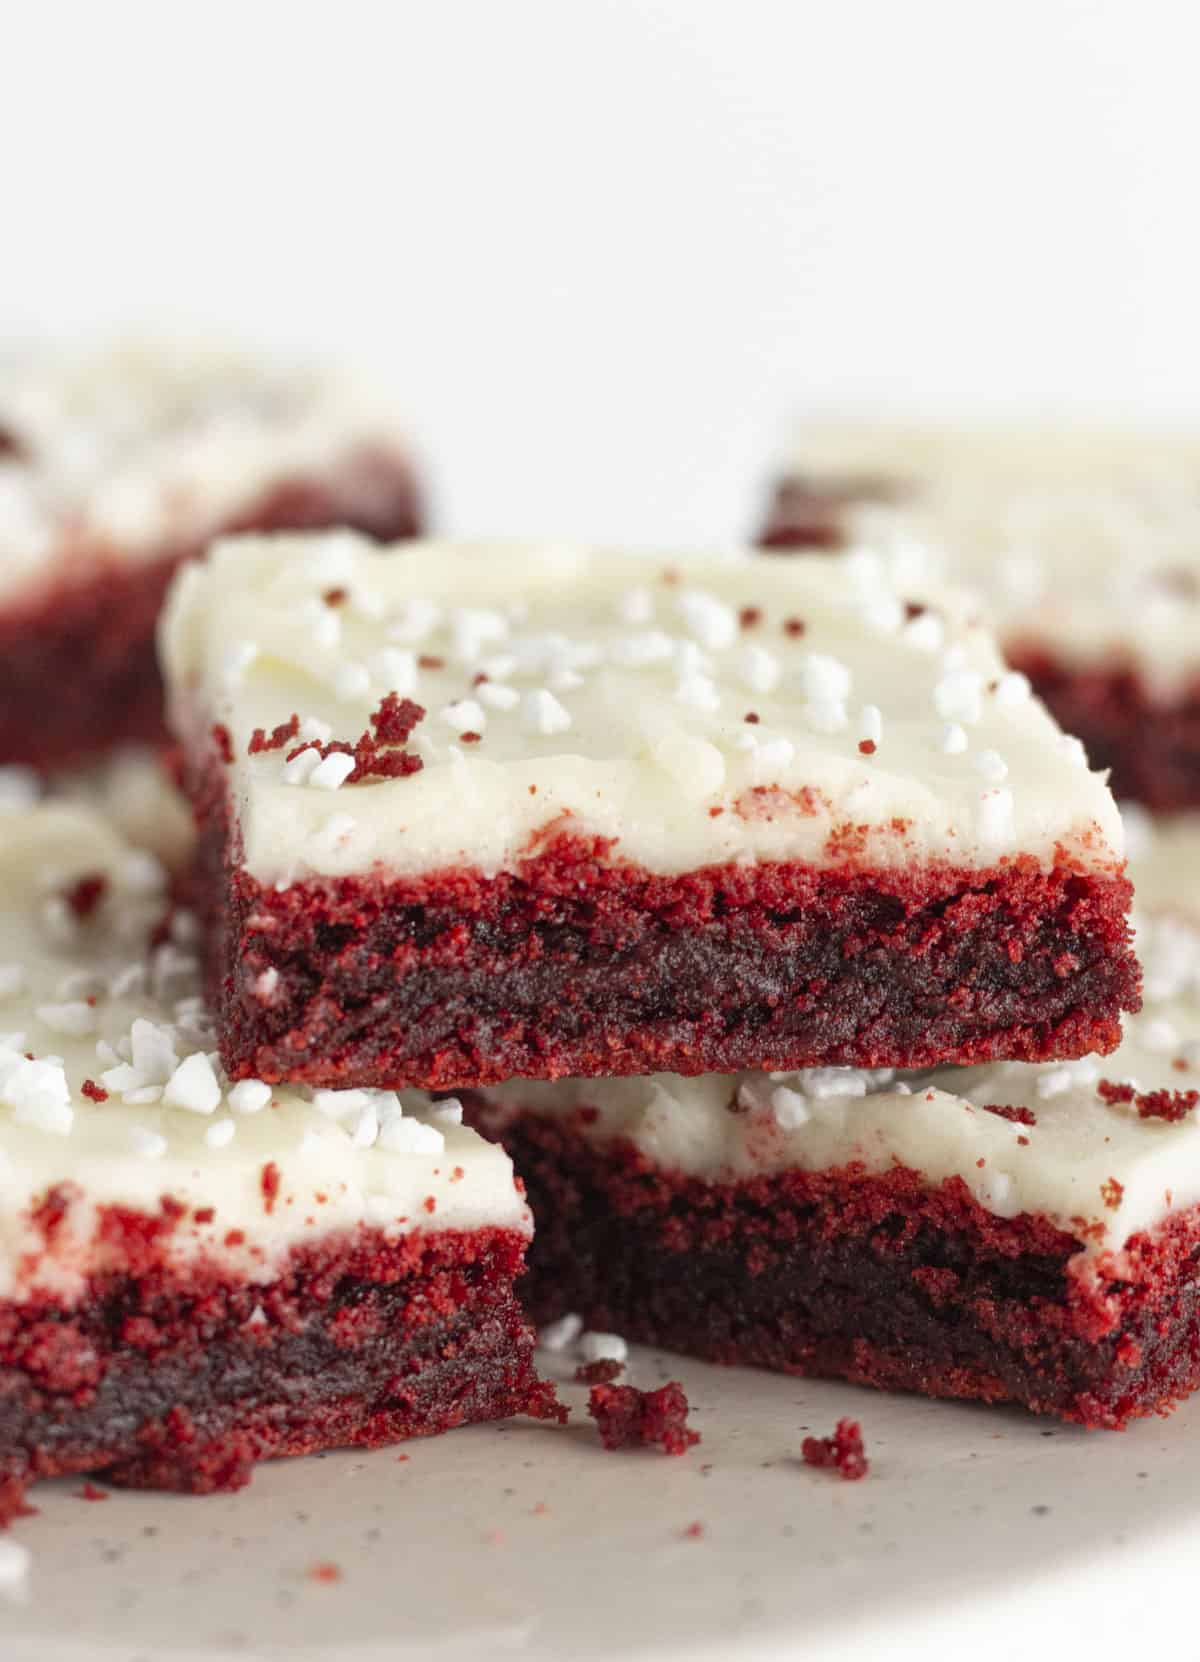 Finished red velvet brownies with cream cheese frosting.